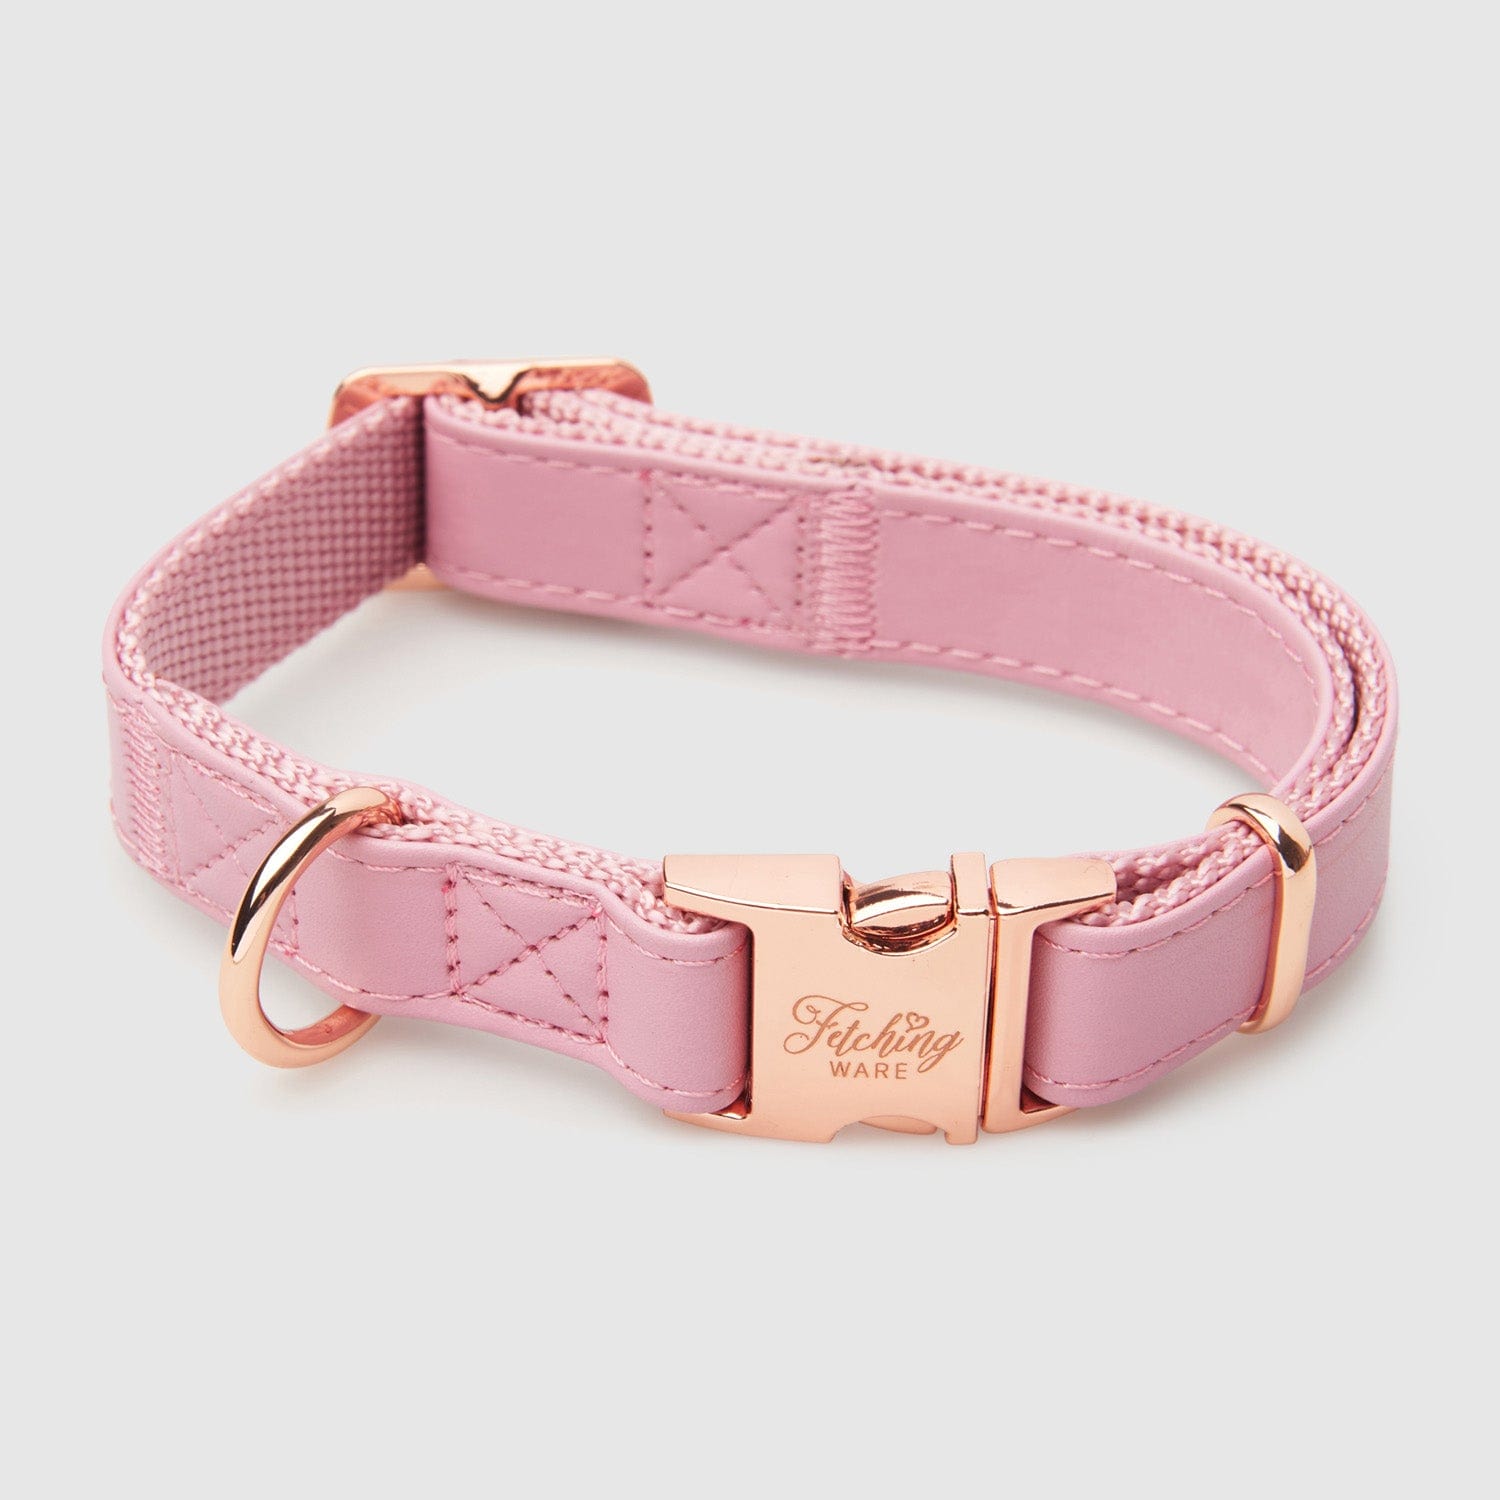 Our Rosa in Rose Gold, Pink Dog Collar